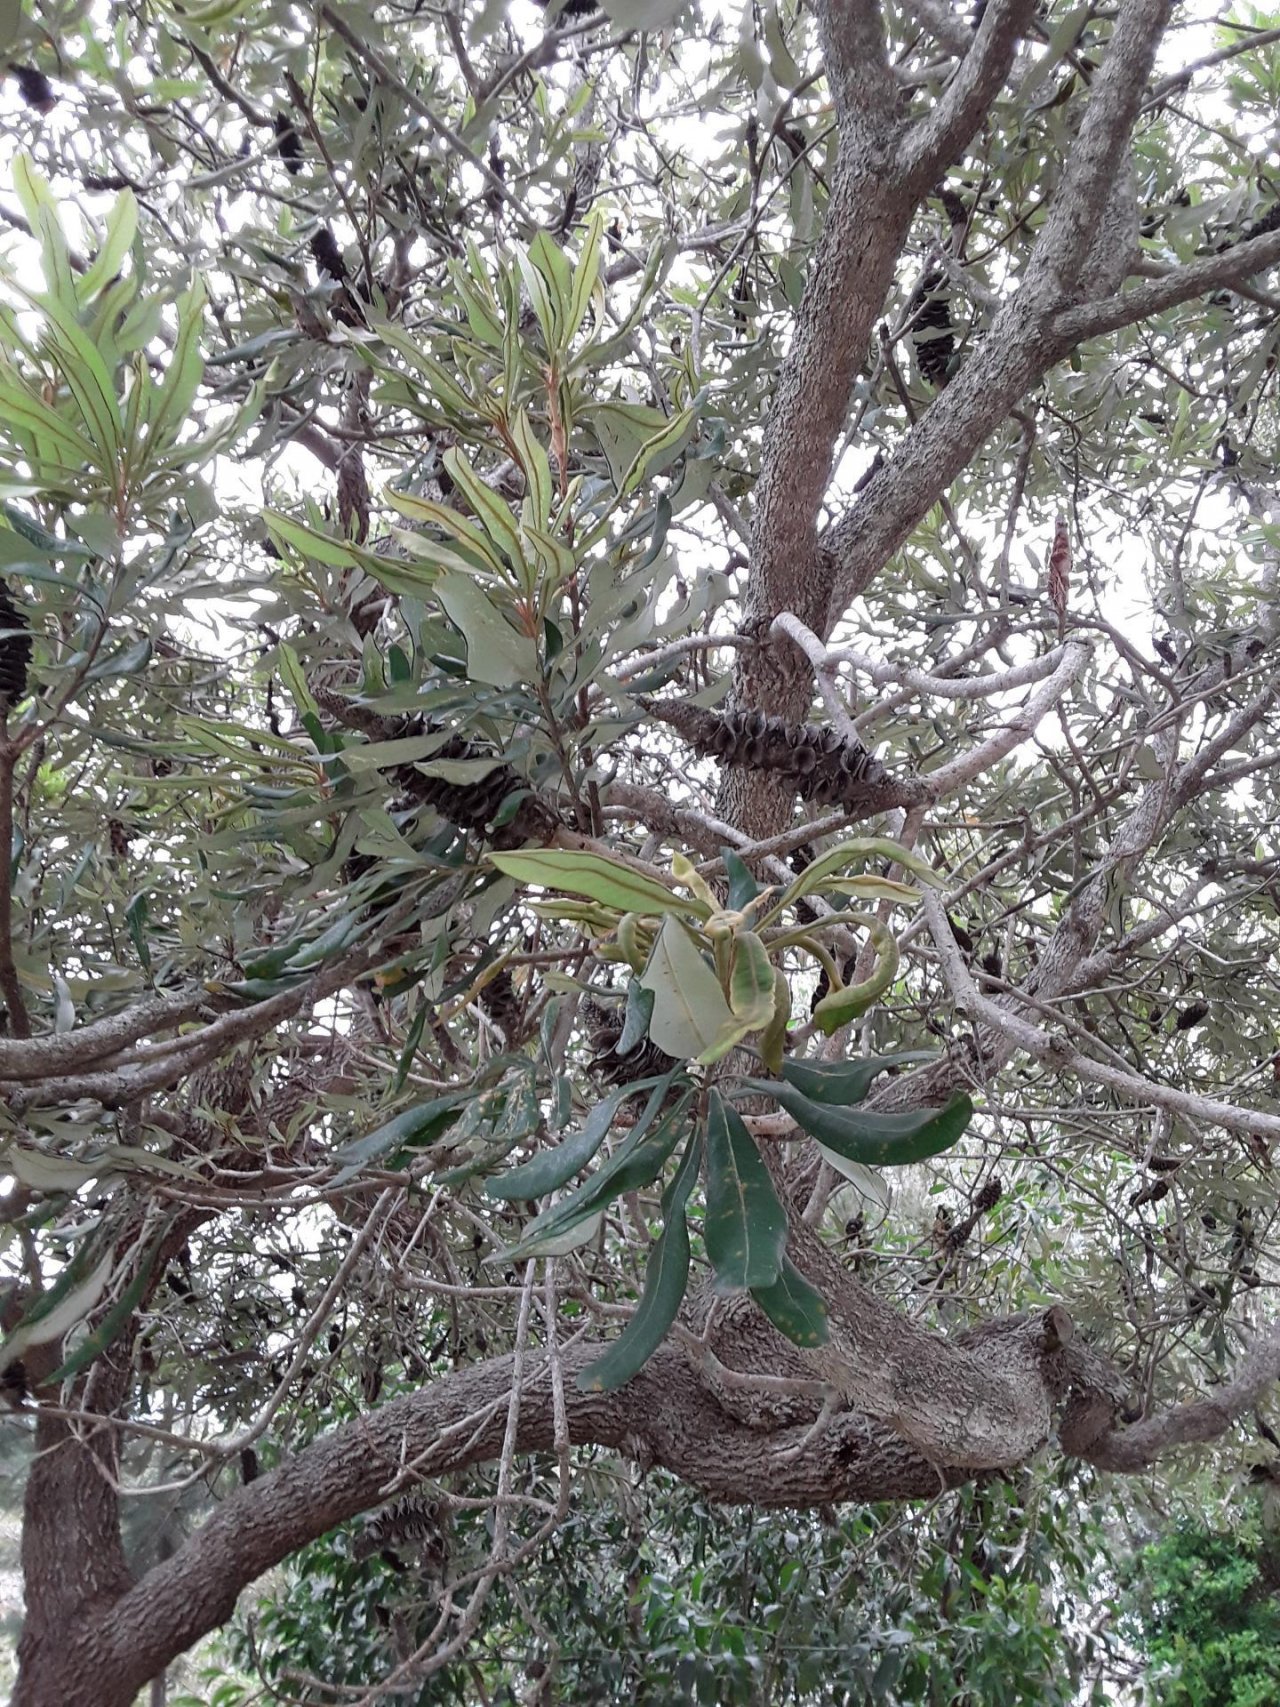 Coastal Banksia in ClimateWatch App spotted by Sameer Punde on 20.02.2021